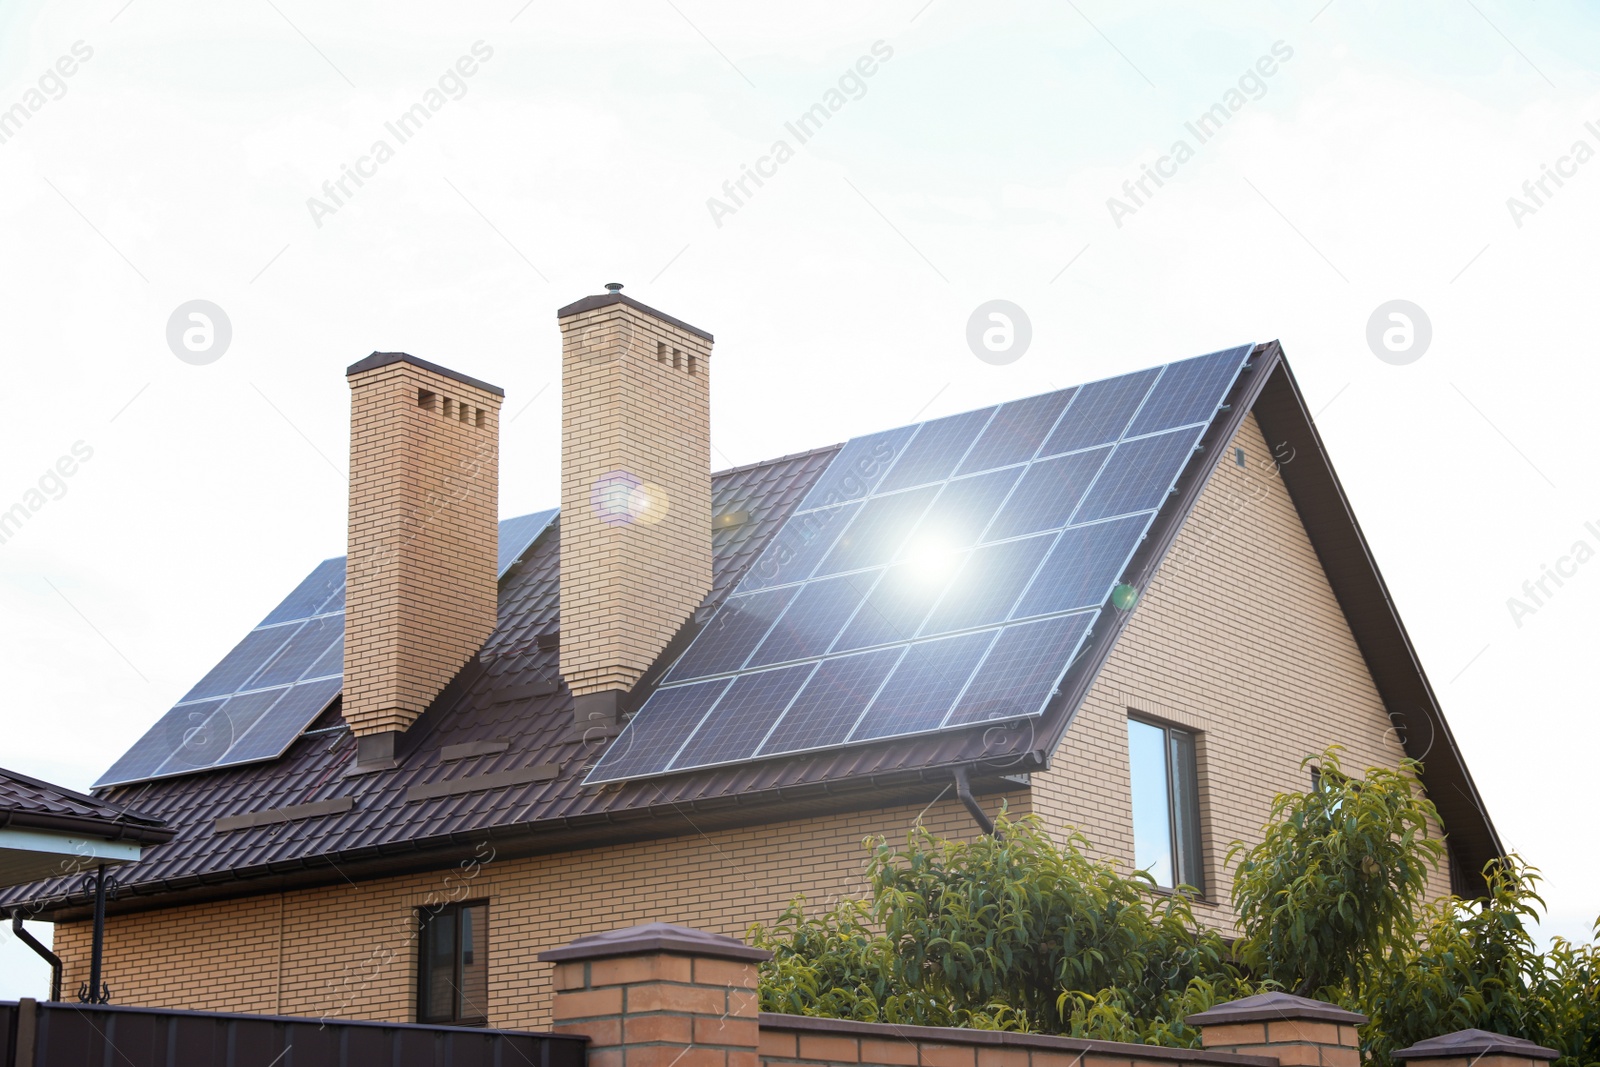 Photo of House with installed solar panels on roof